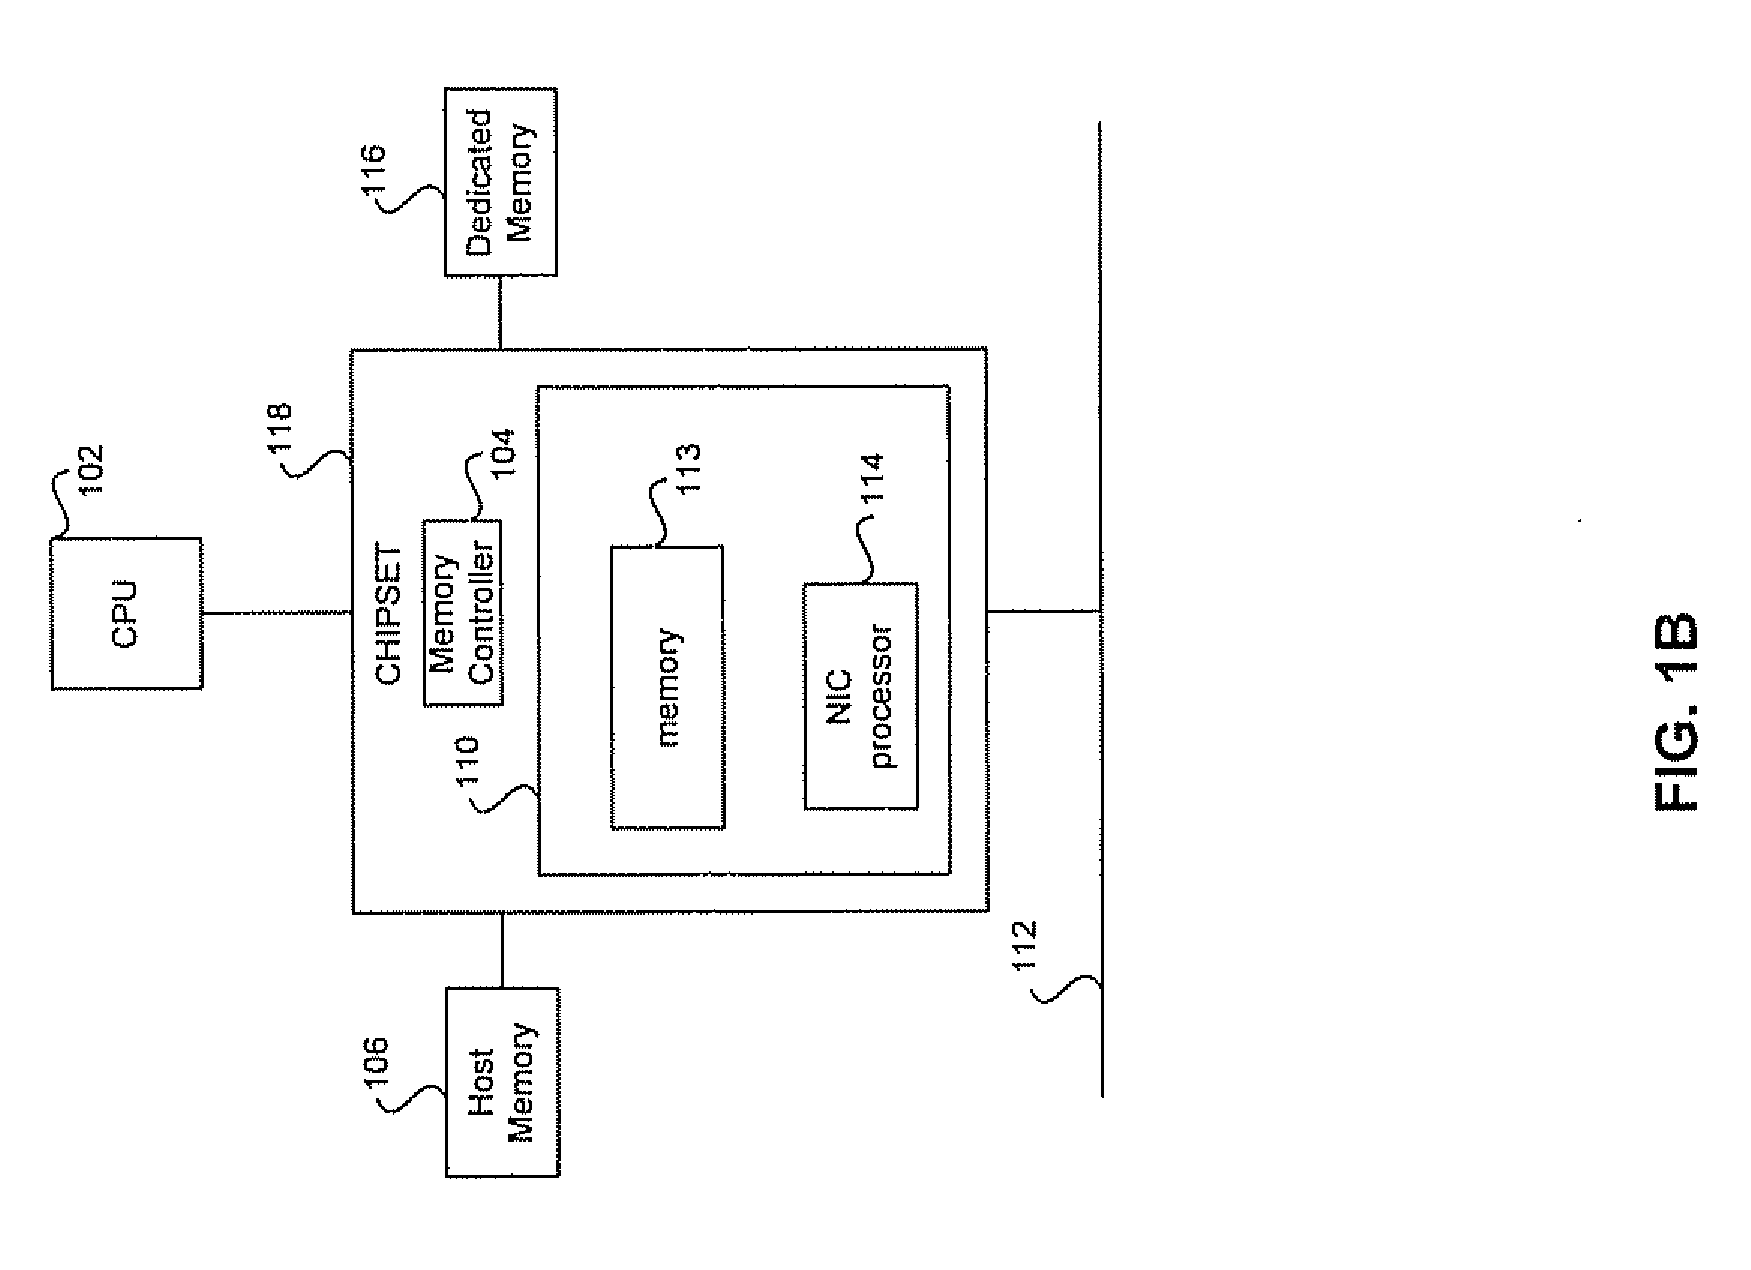 Method and system for quality of service and congestion management for converged network interface devices